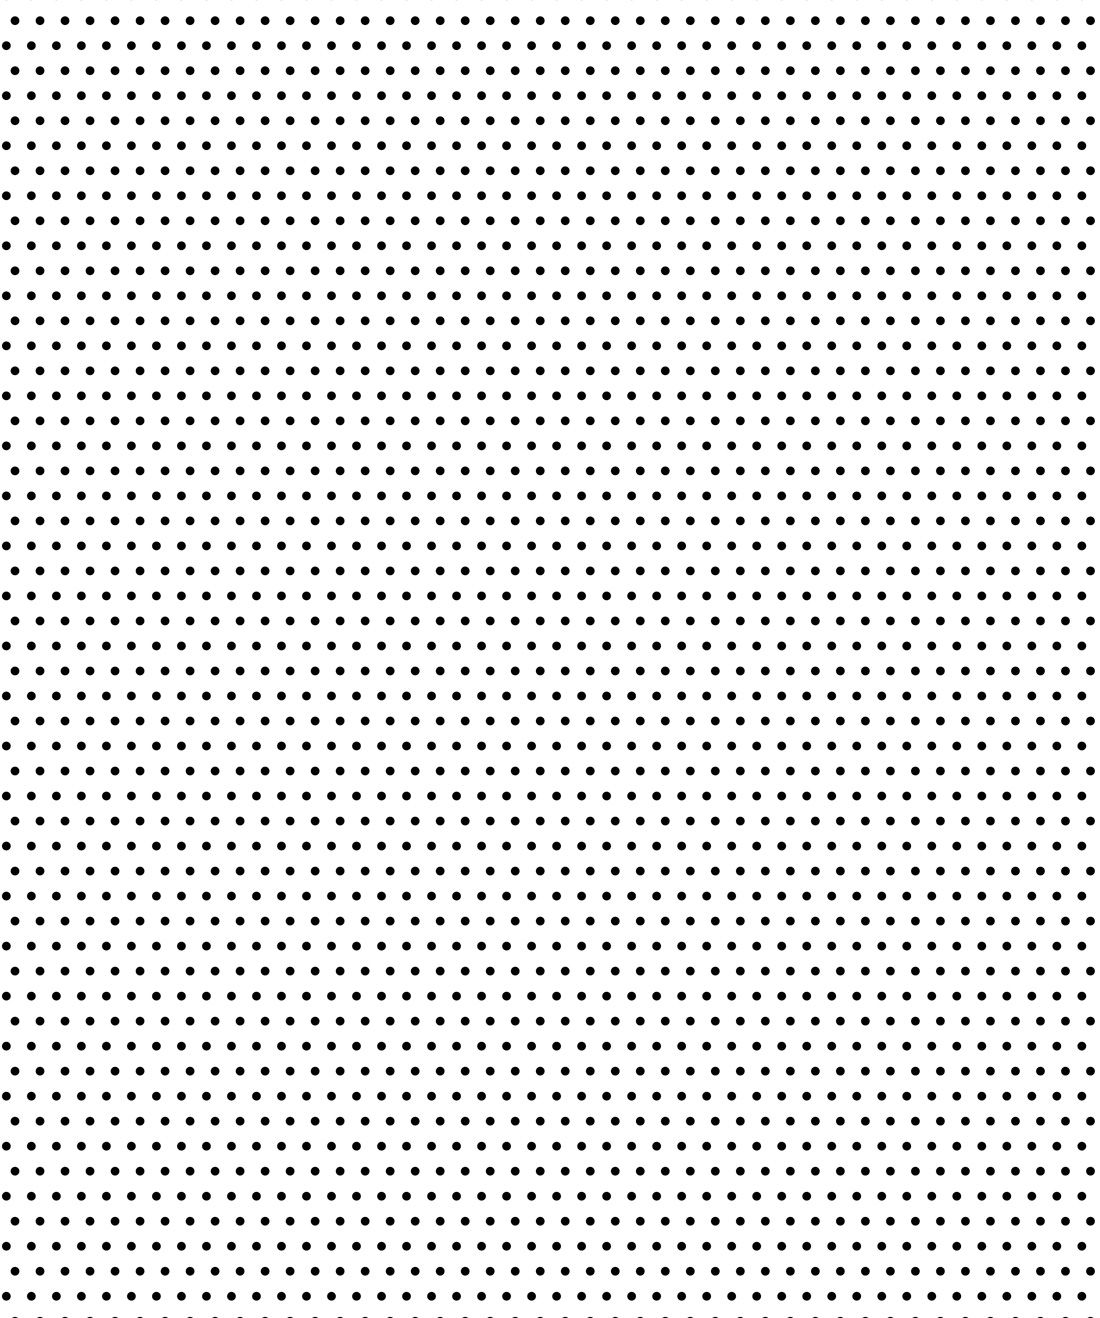 Simplimente Puntos is a black and white dot wallpaper